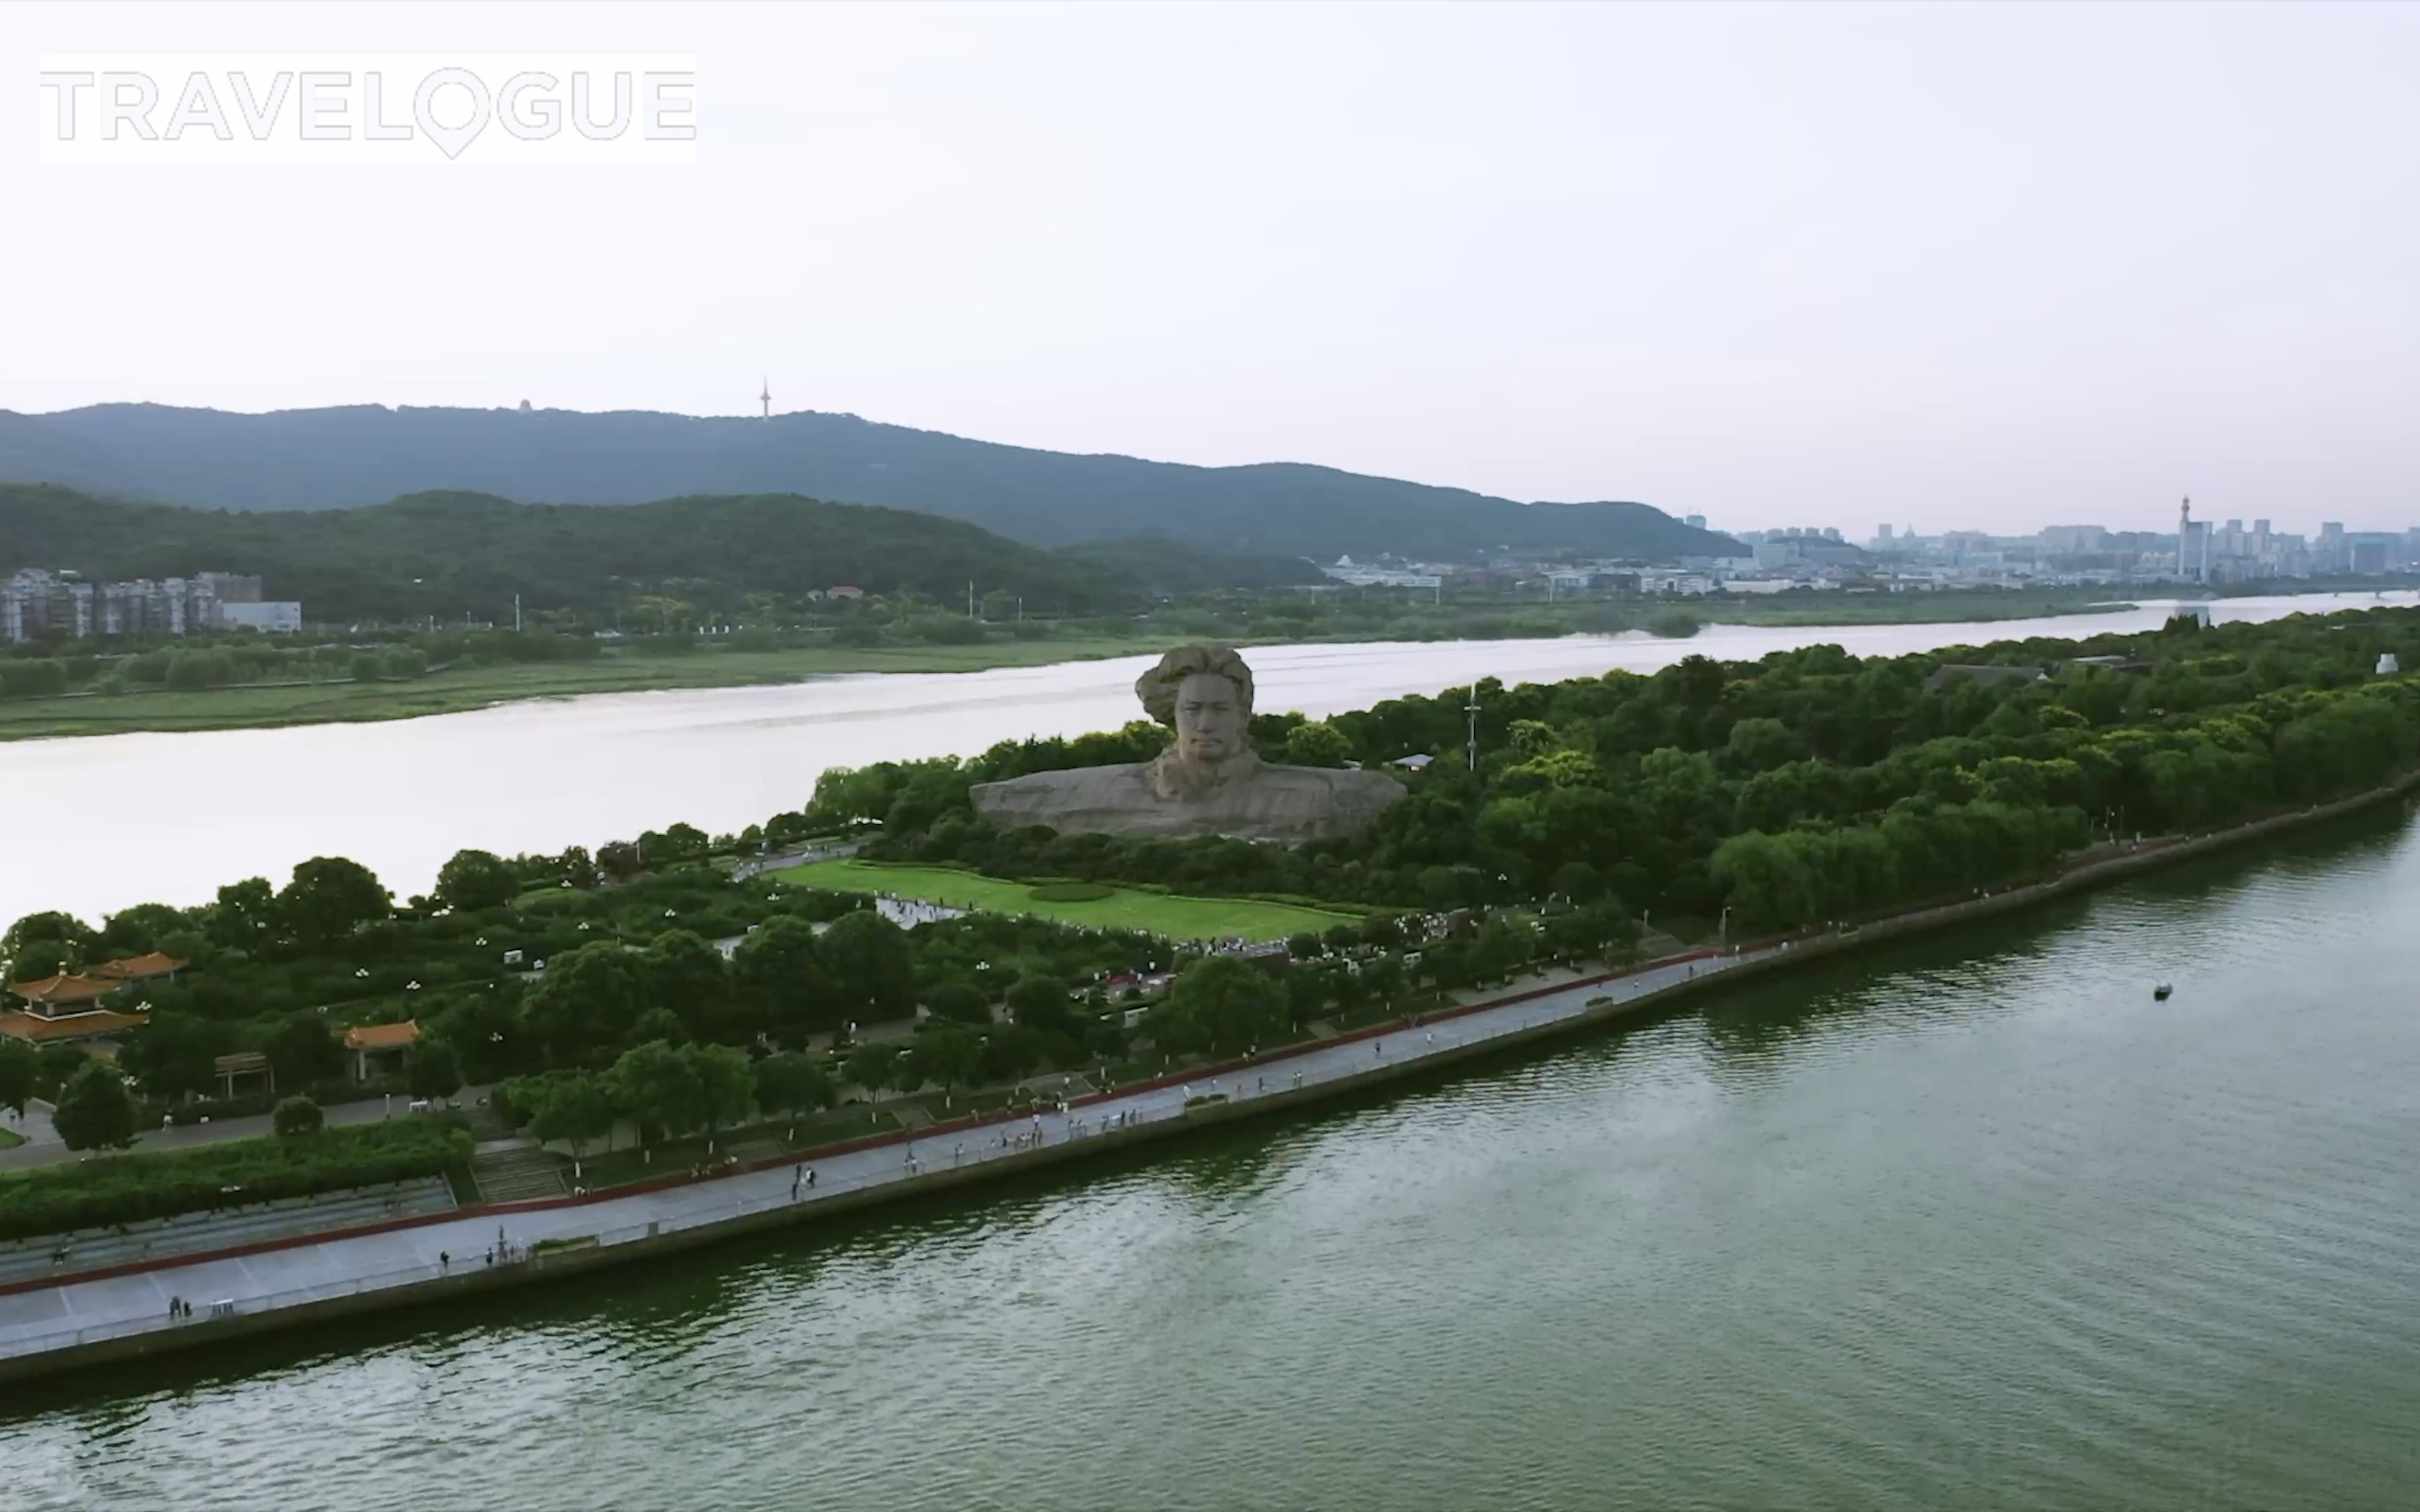 Known for its long and storied history, Changsha in central China's Hunan Province boasts skyscrapers and a modern cityscape, old buildings rendered in ancient architecture styles, and historic sculptures. /CGTN